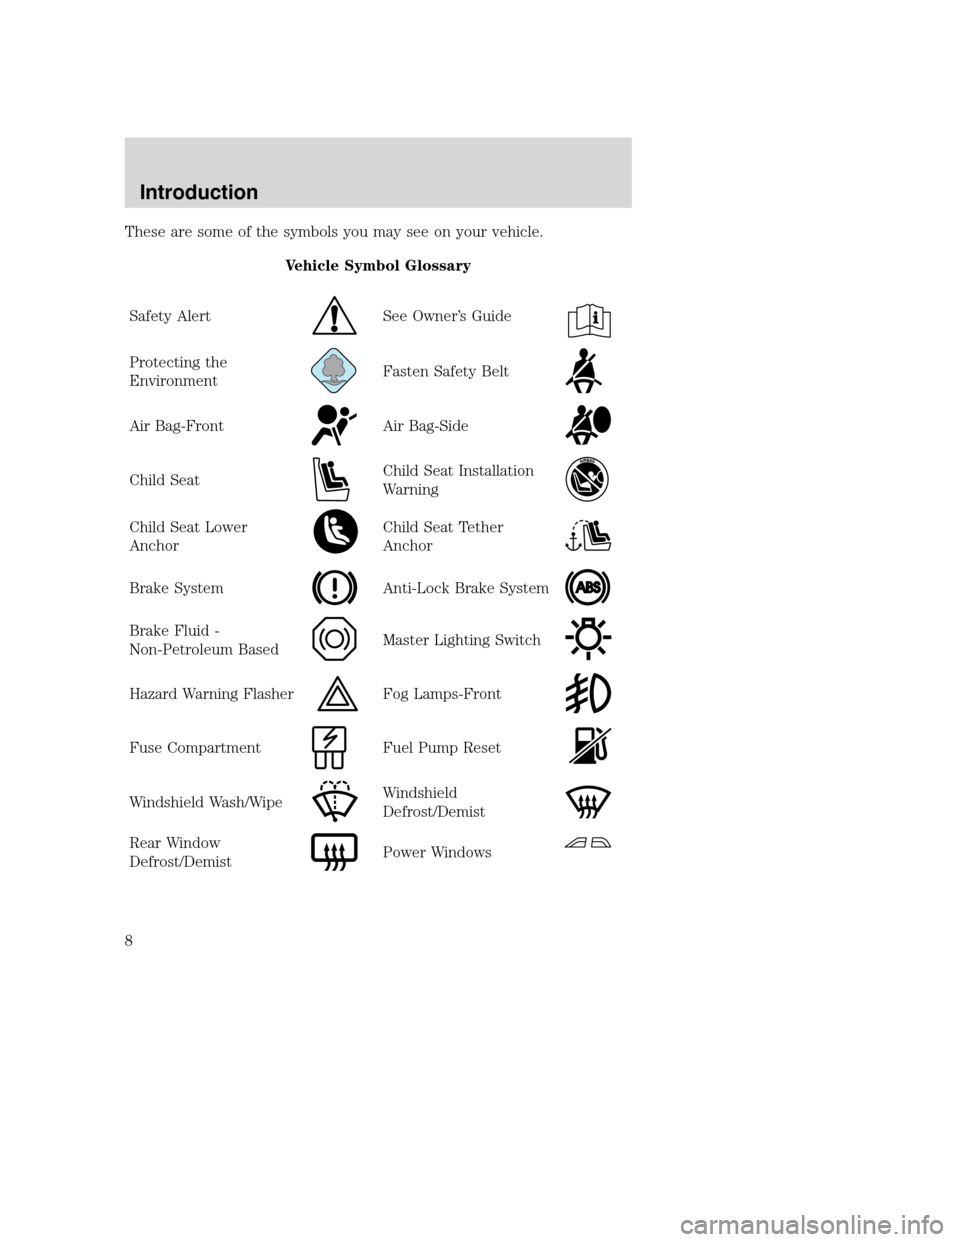 MAZDA MODEL B-SERIES 2005  Owners Manual (in English) These are some of the symbols you may see on your vehicle.
Vehicle Symbol Glossary
Safety Alert
See Owner’s Guide
Protecting the
EnvironmentFasten Safety Belt
Air Bag-FrontAir Bag-Side
Child SeatChi